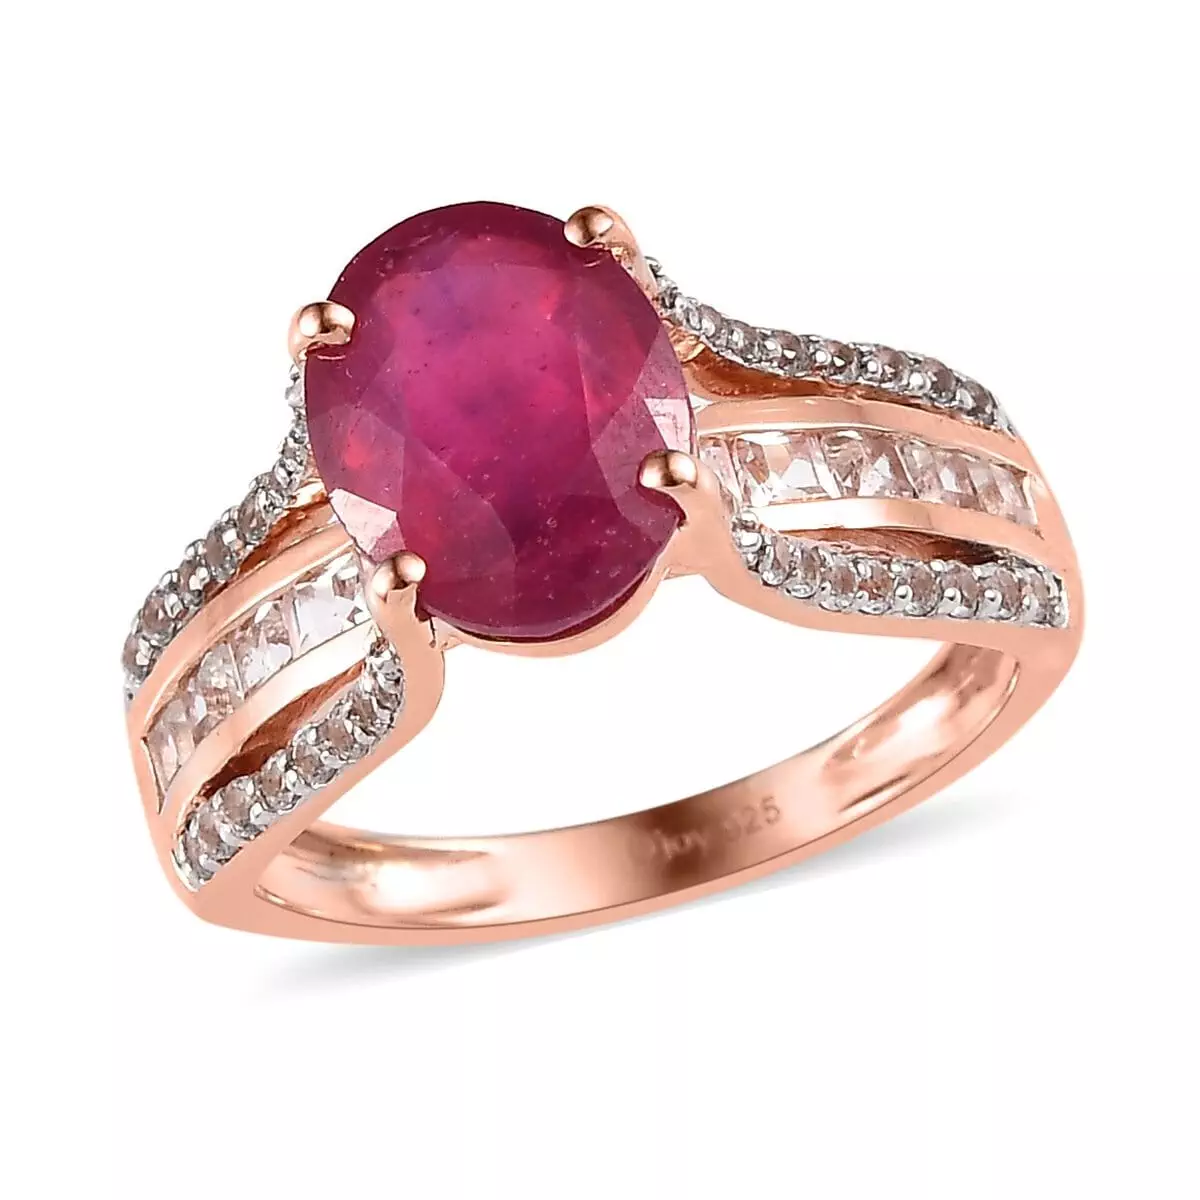 Ilakaka Hot Pink Sapphire (FF) and White Topaz Ring in Vermeil Rose Gold Over Sterling Silver 4.65 ctw